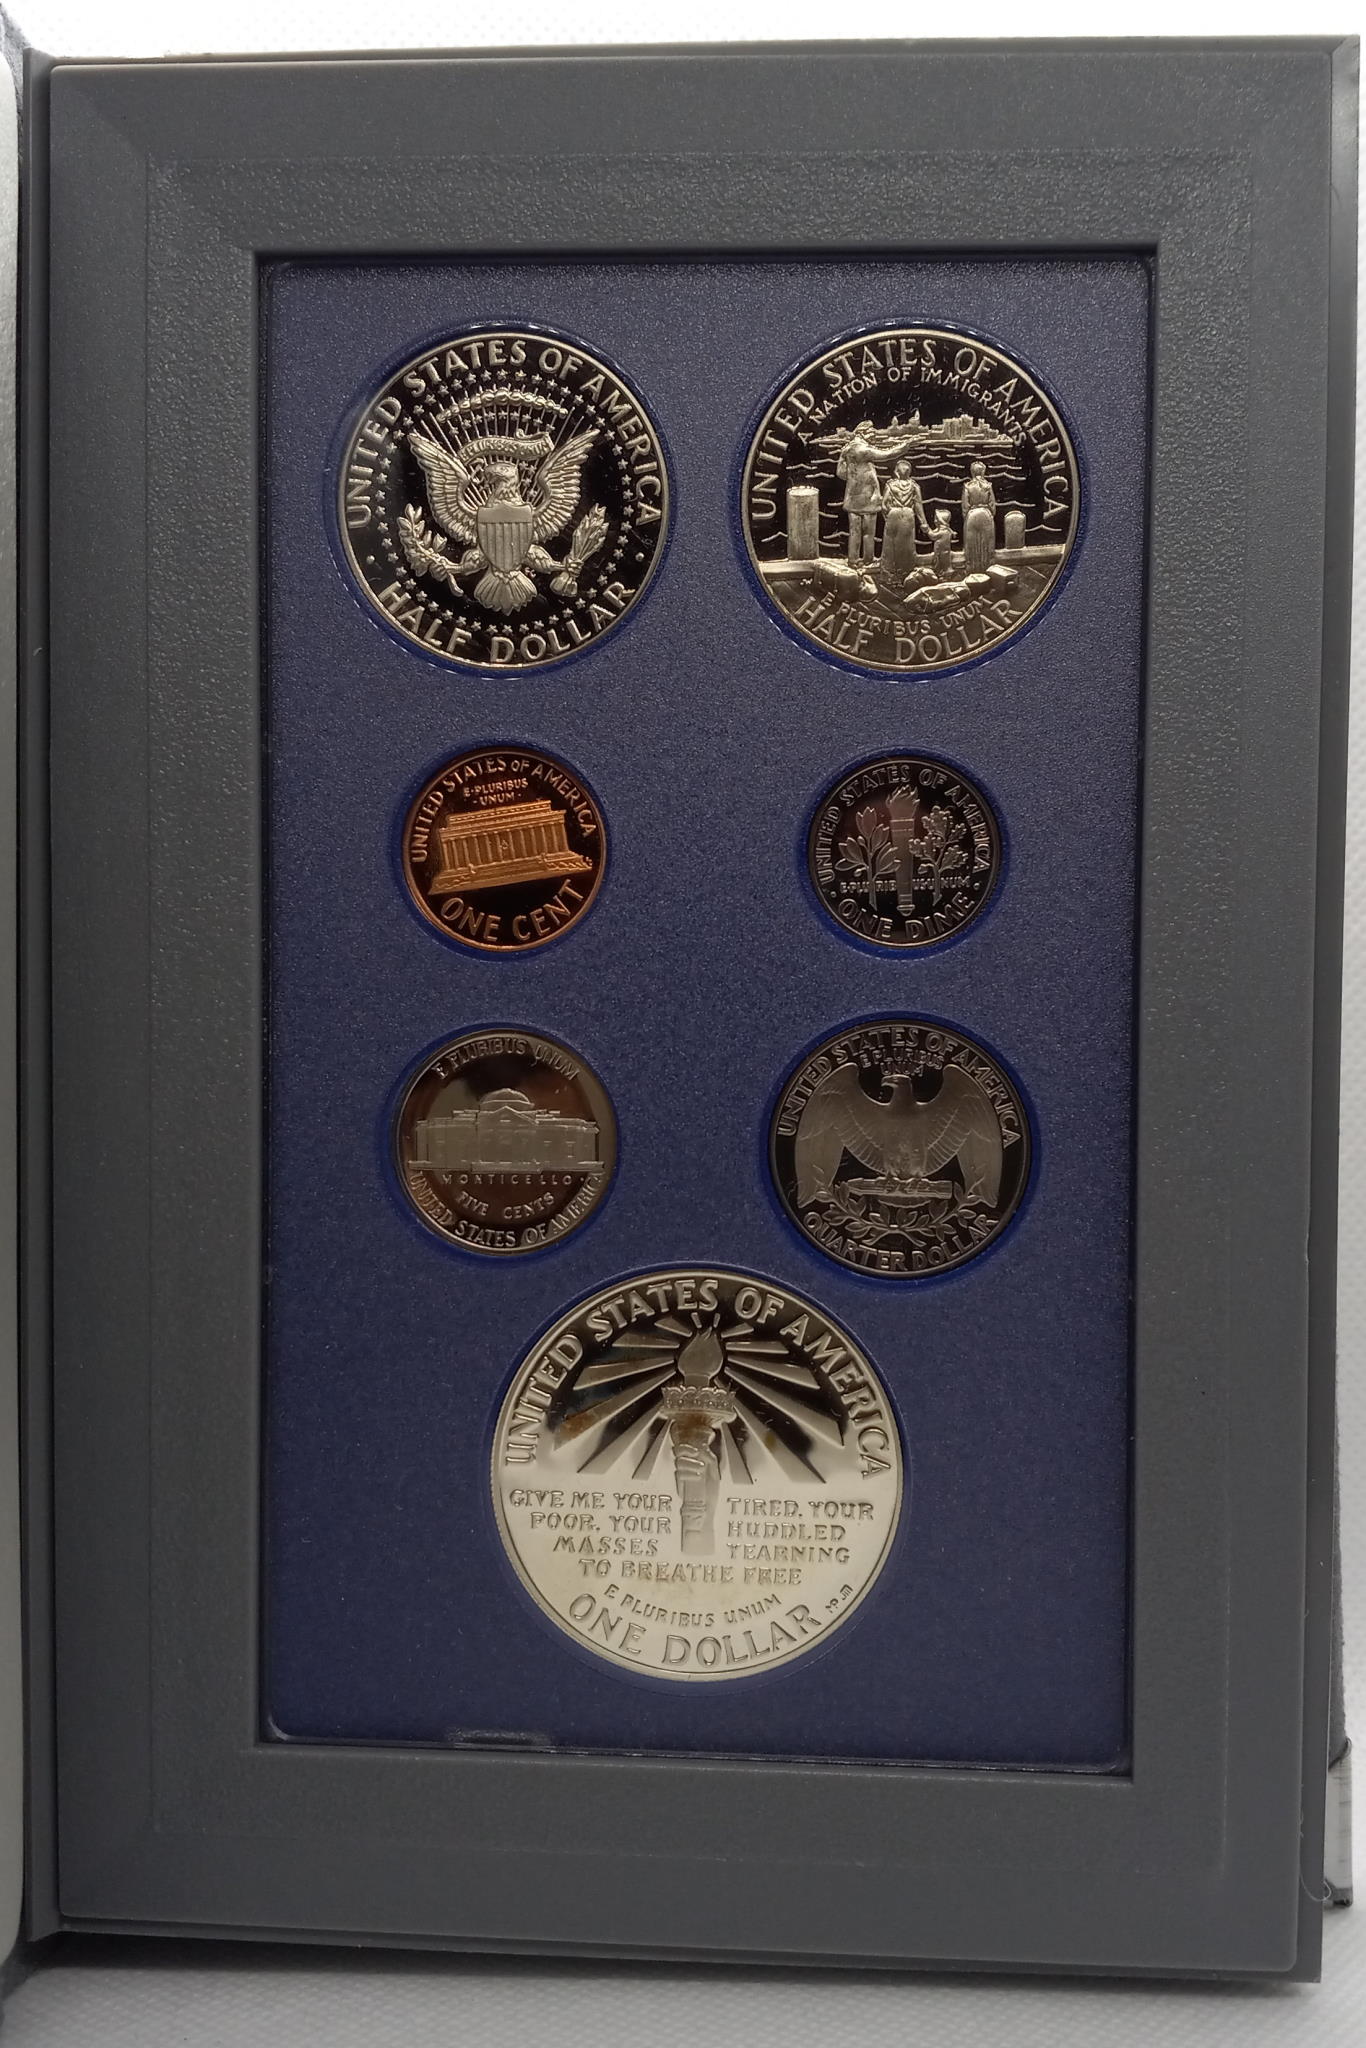 1986 United States Mint Prestige Proof Set in OGP with COA Statue of Liberty